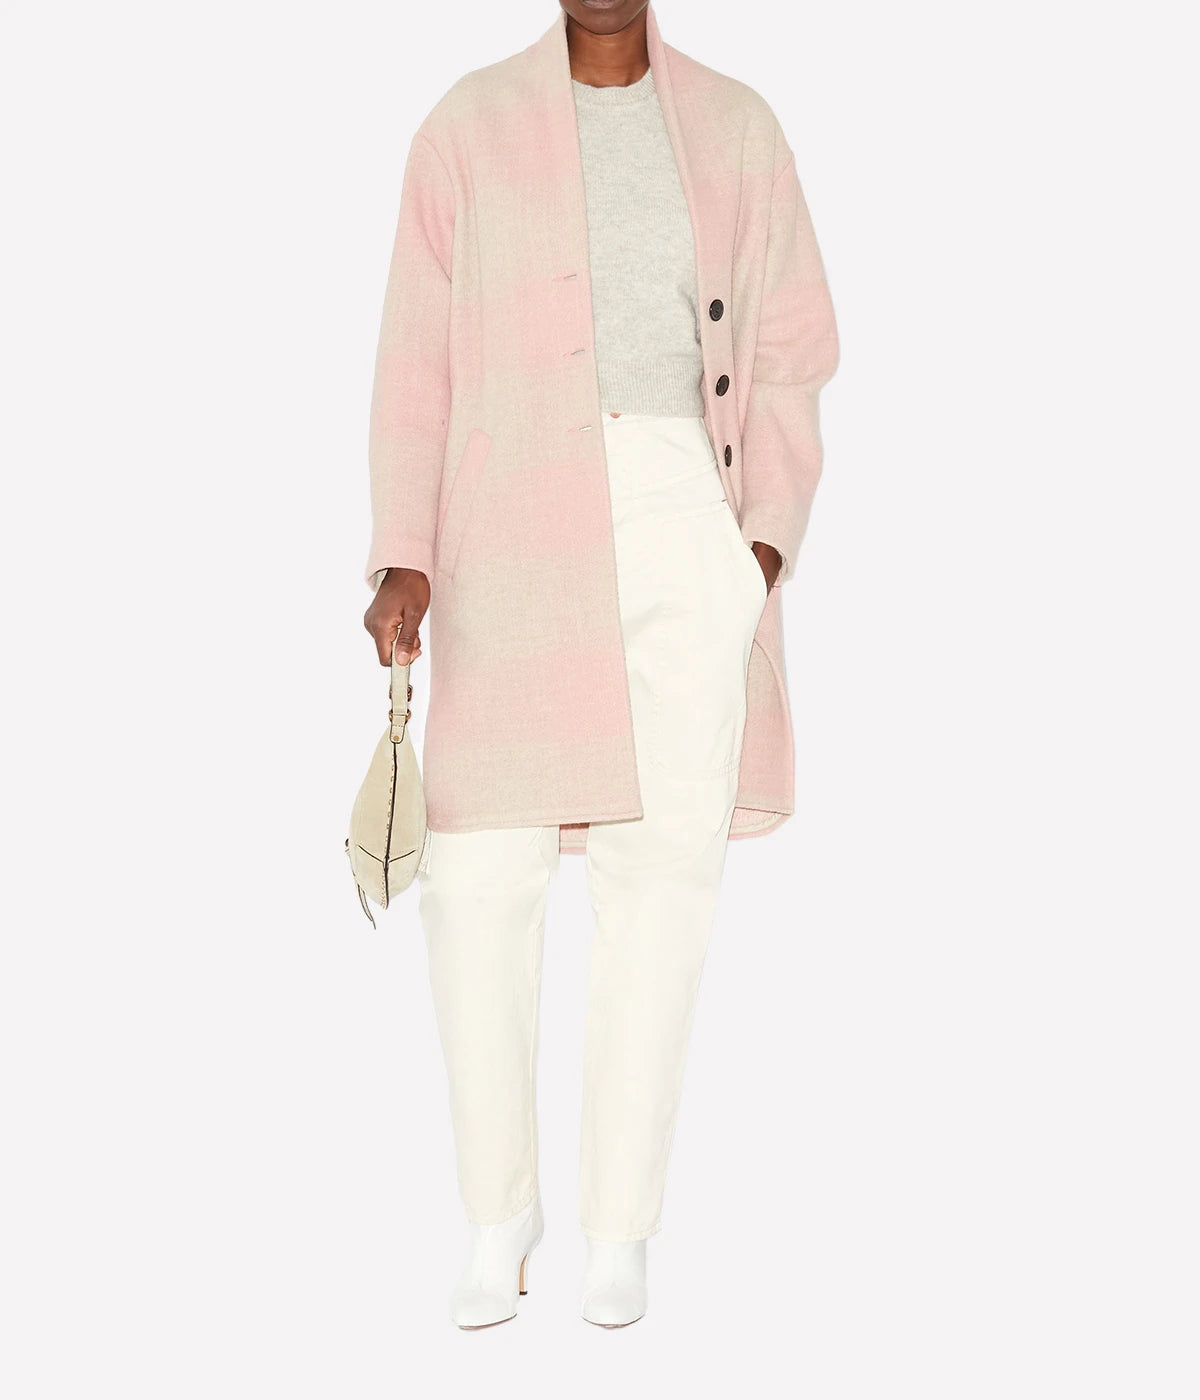 Gabriel Checked Coat in Light Pink